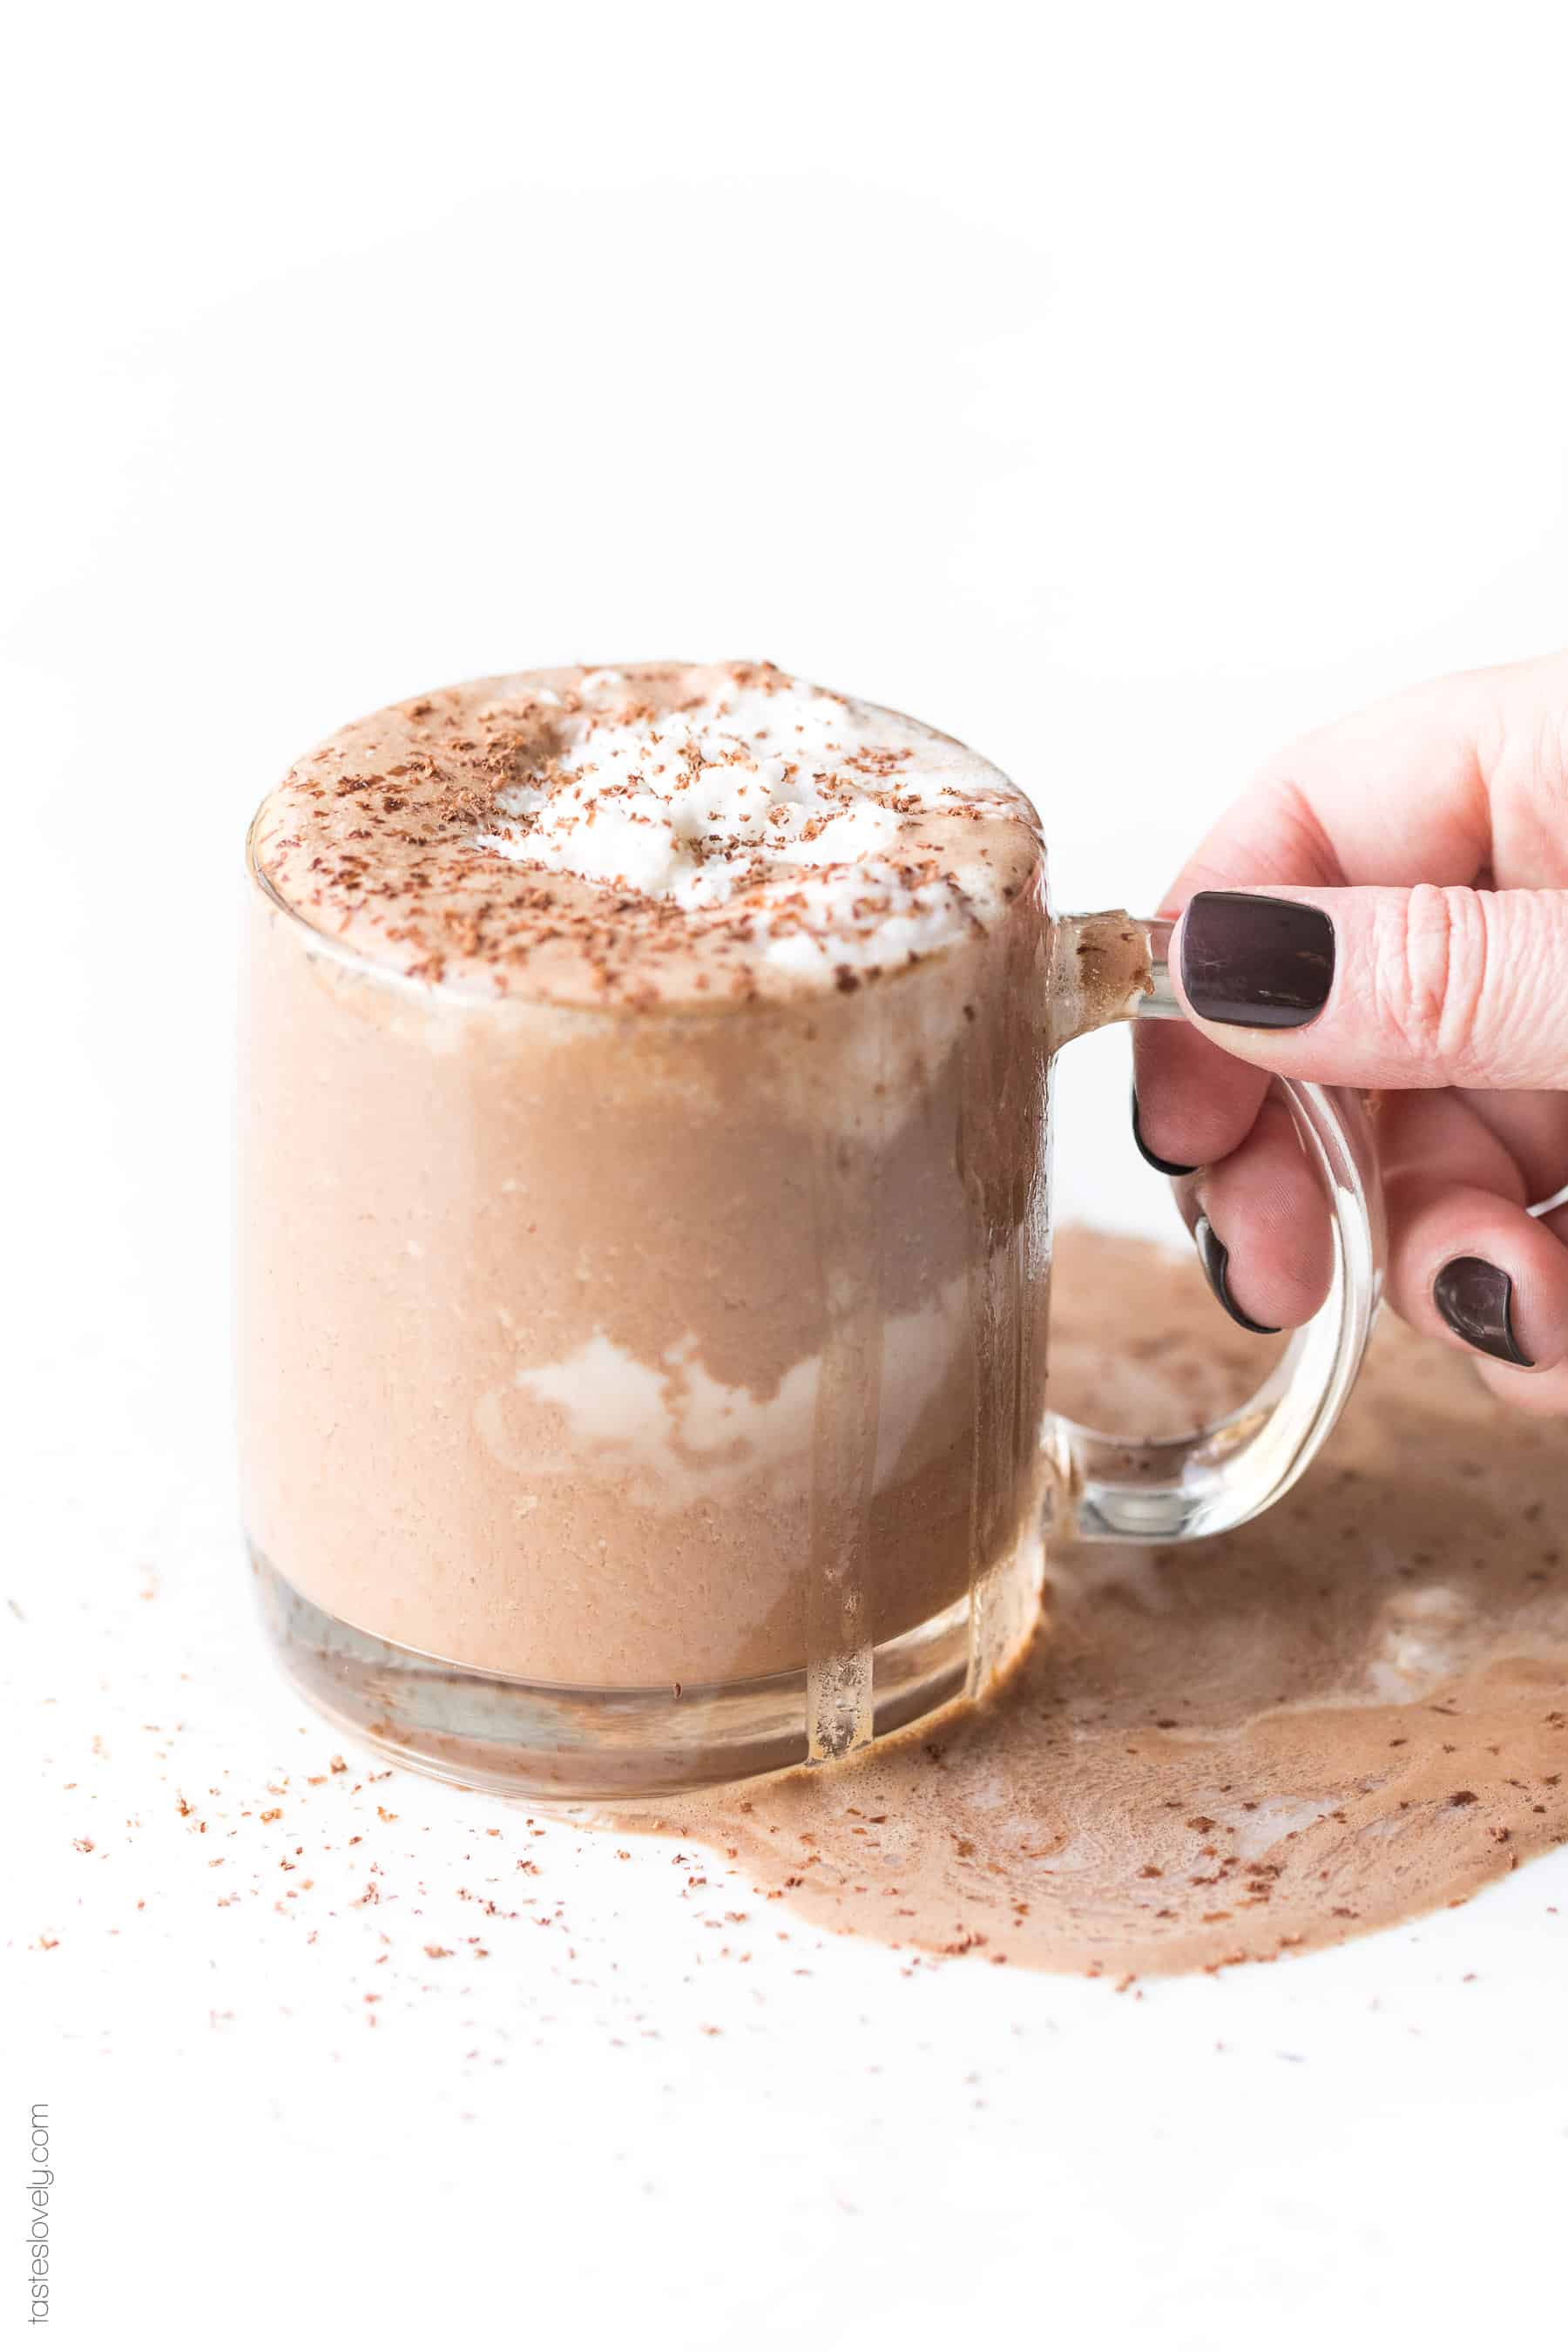 Hand holding hot chocolate in a clear mug topped with whipped cream and shaved chocolate